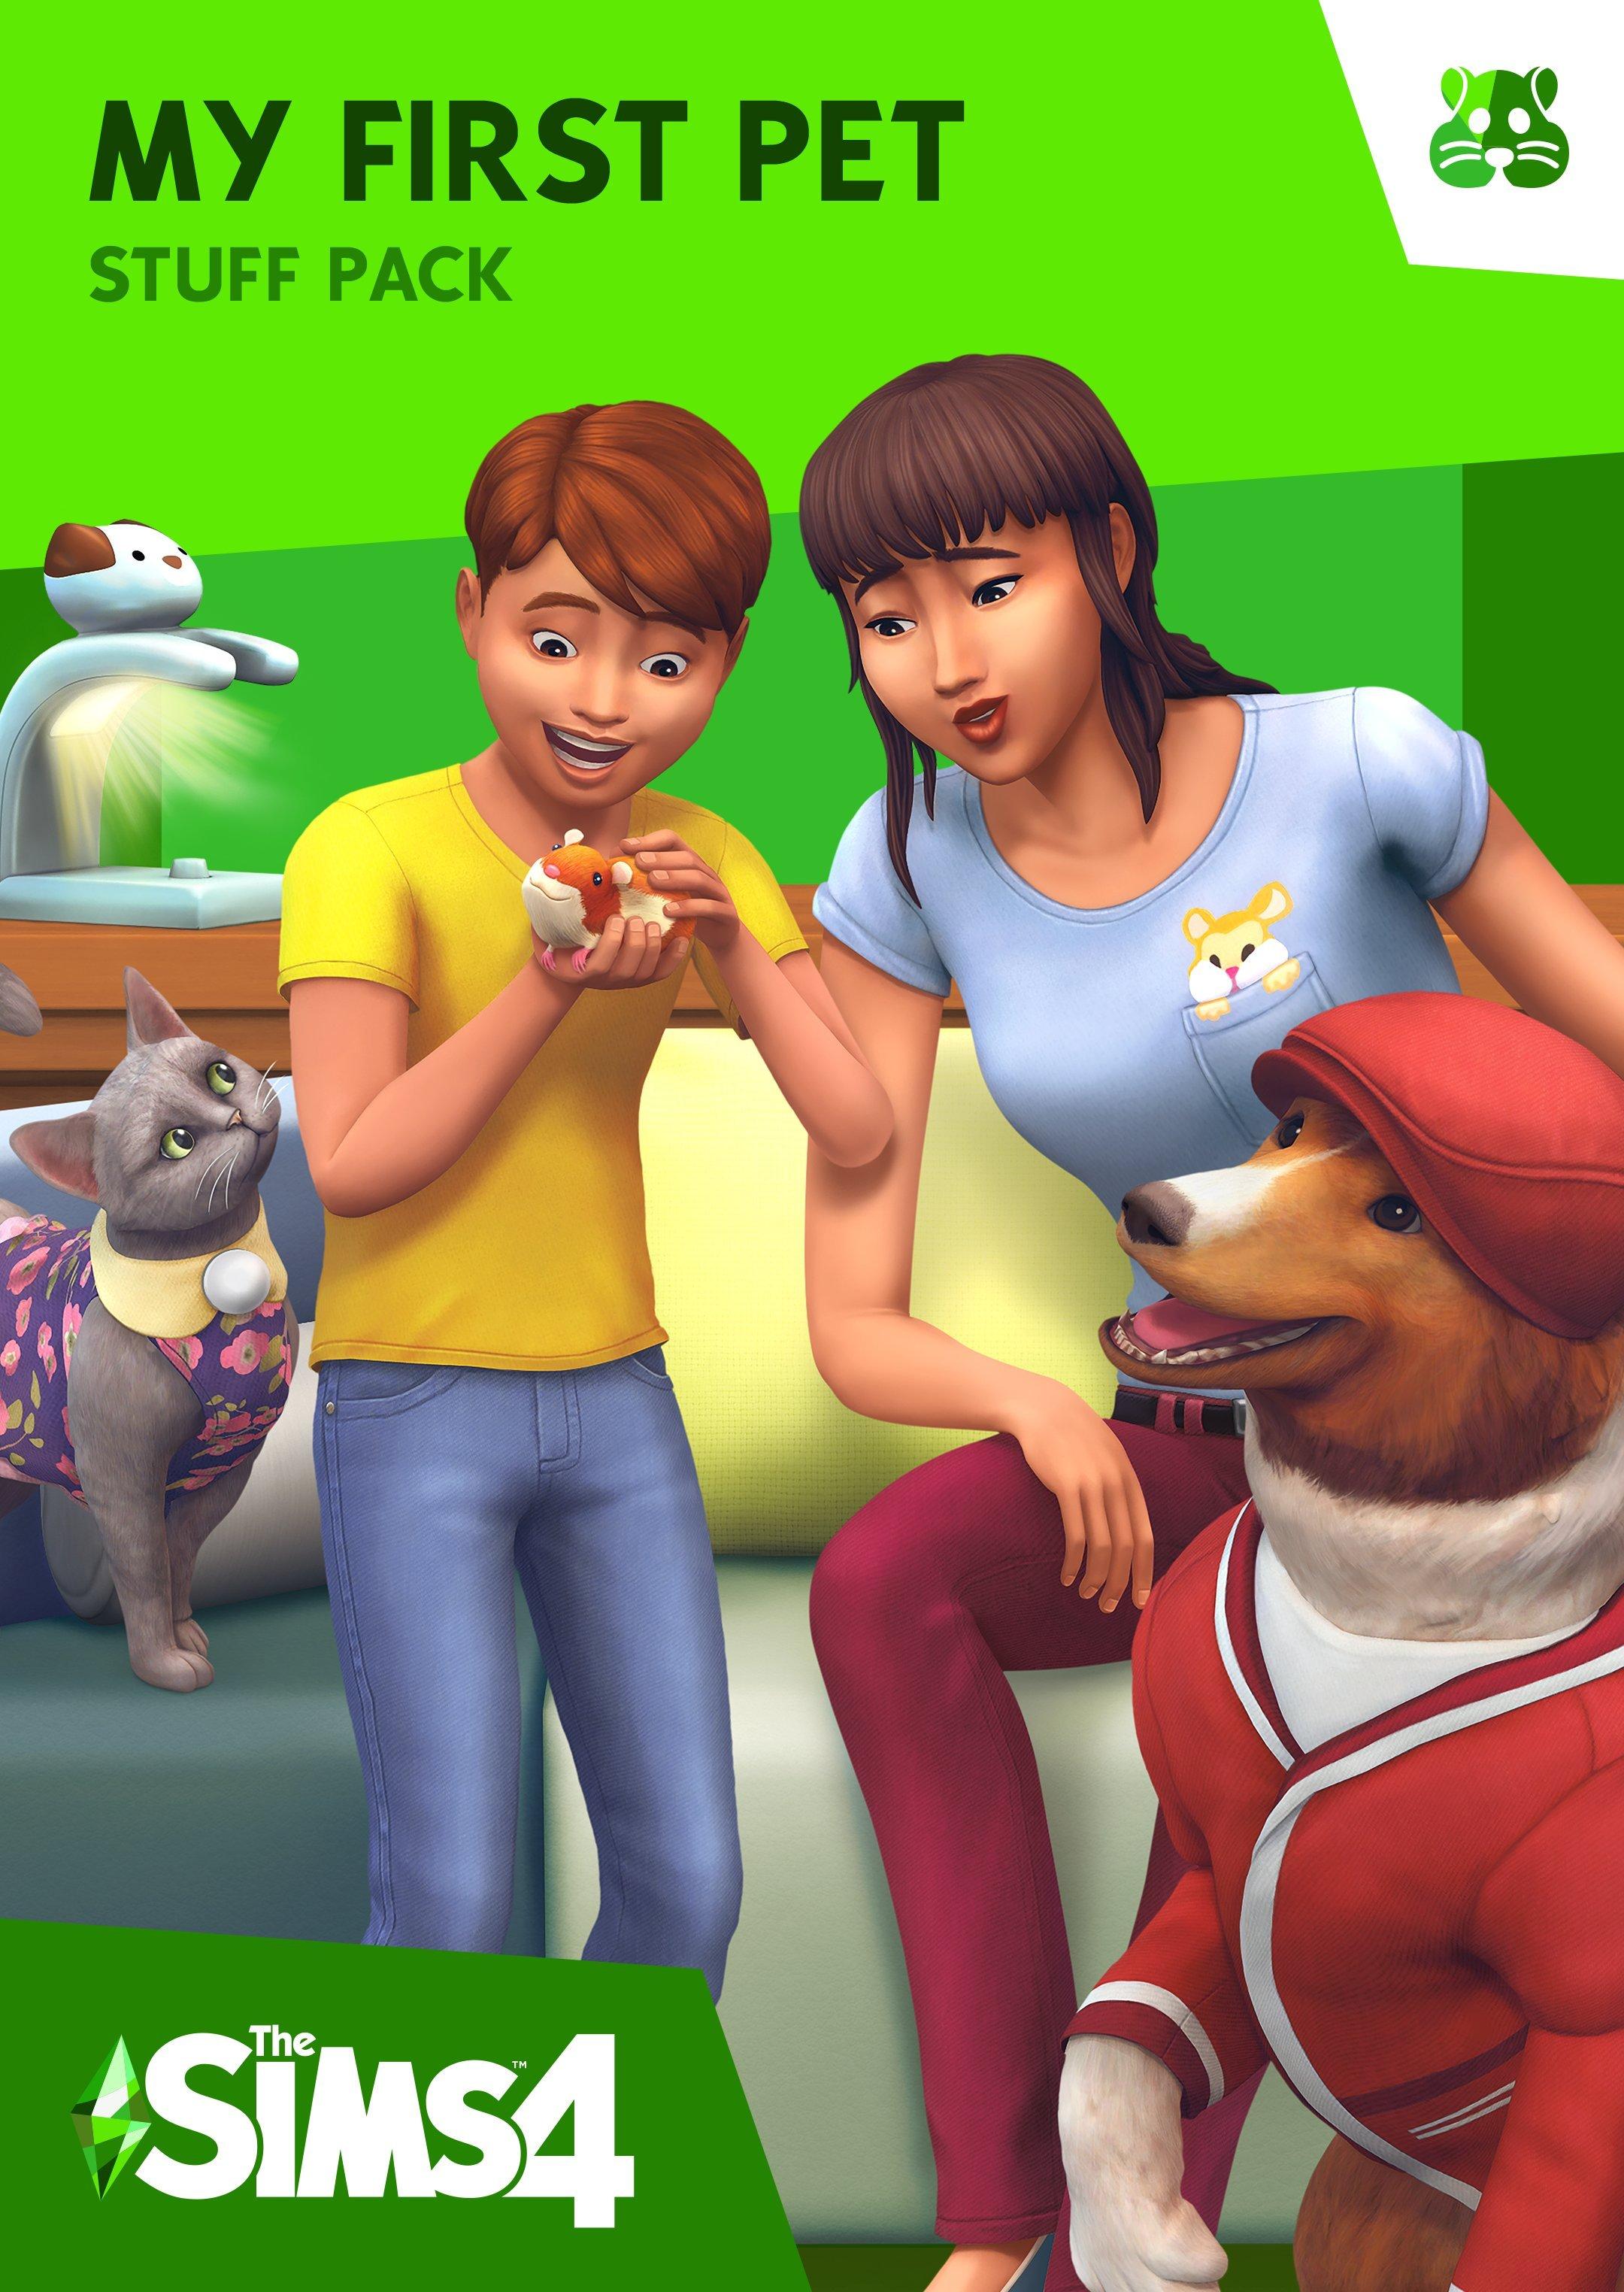 Grab The Sims 4 My First Pet Stuff for Free, Plus More Packs on Sale -  KeenGamer